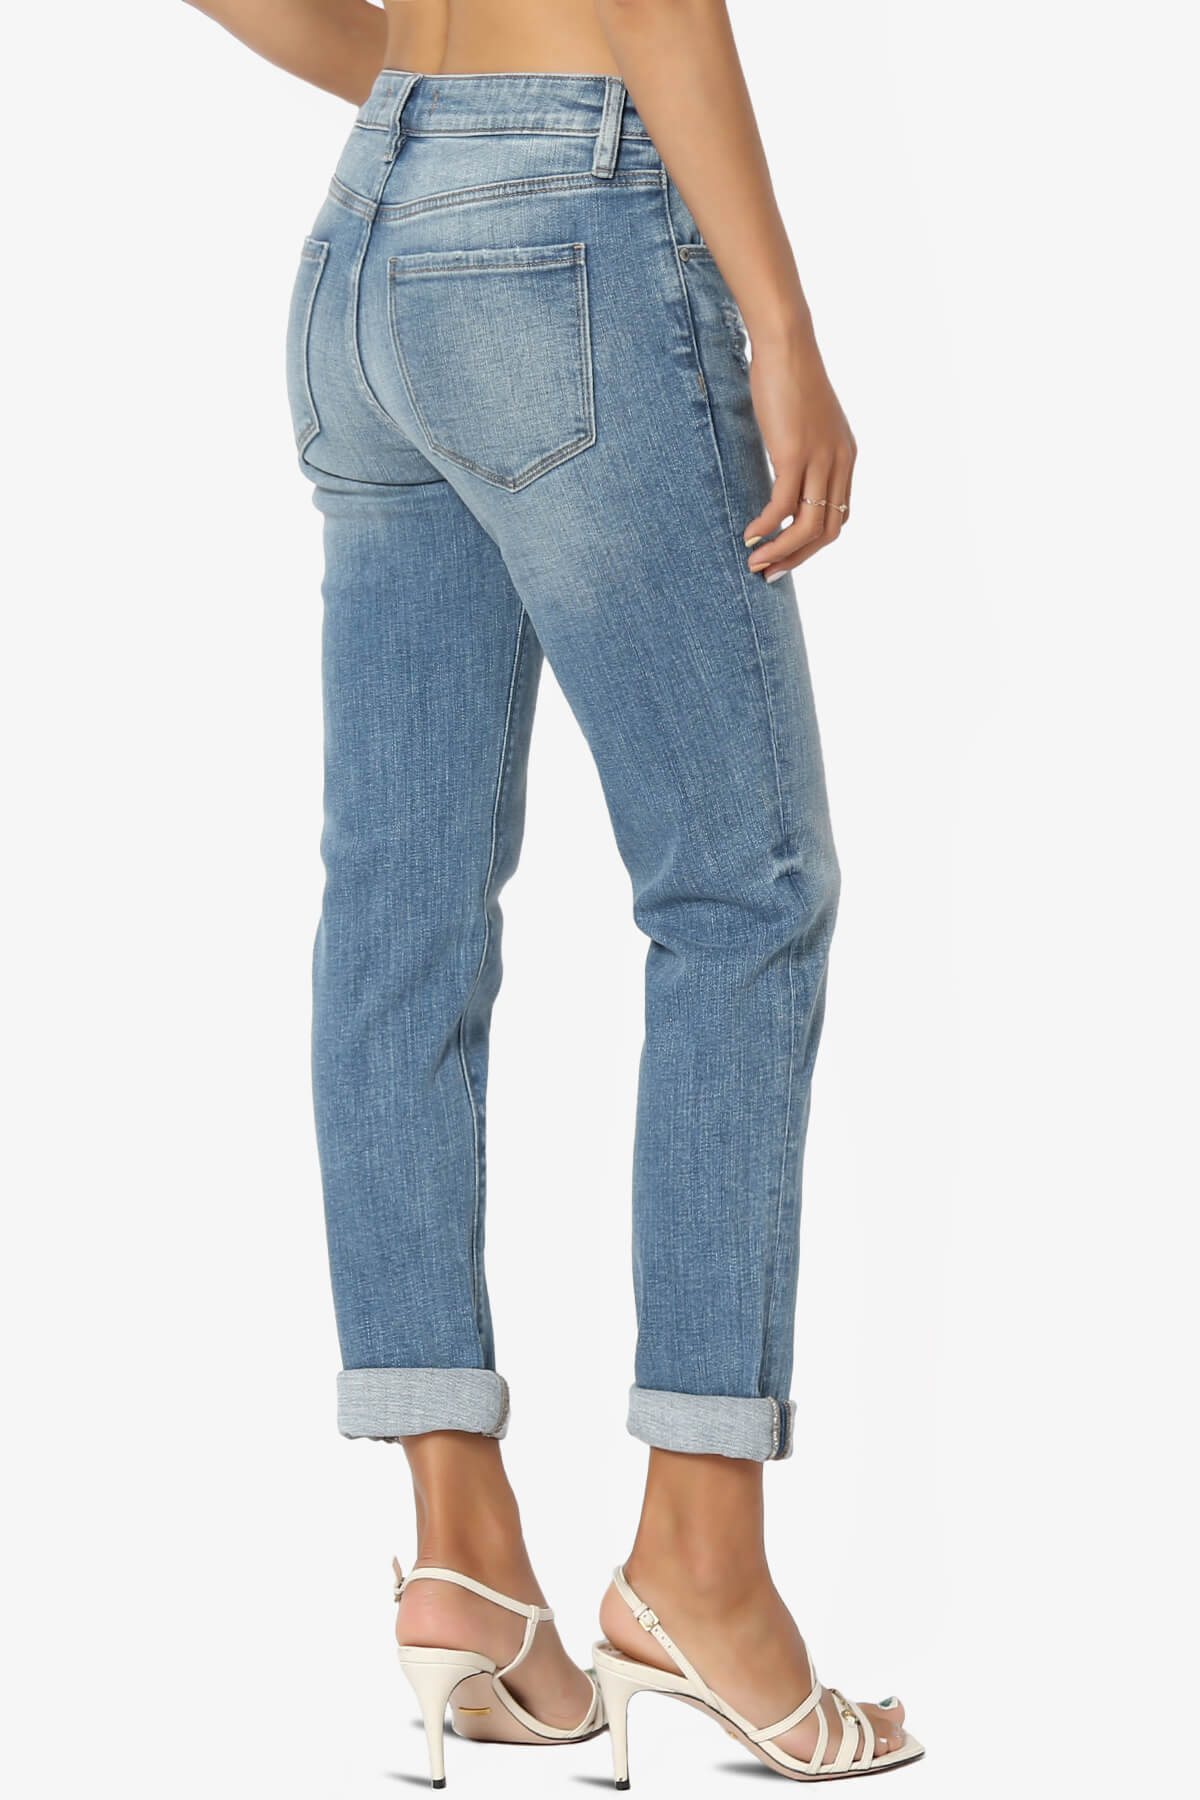 Load image into Gallery viewer, Frankie Mid Rise Girlfriend Jeans in Buzzkill MEDIUM_4
